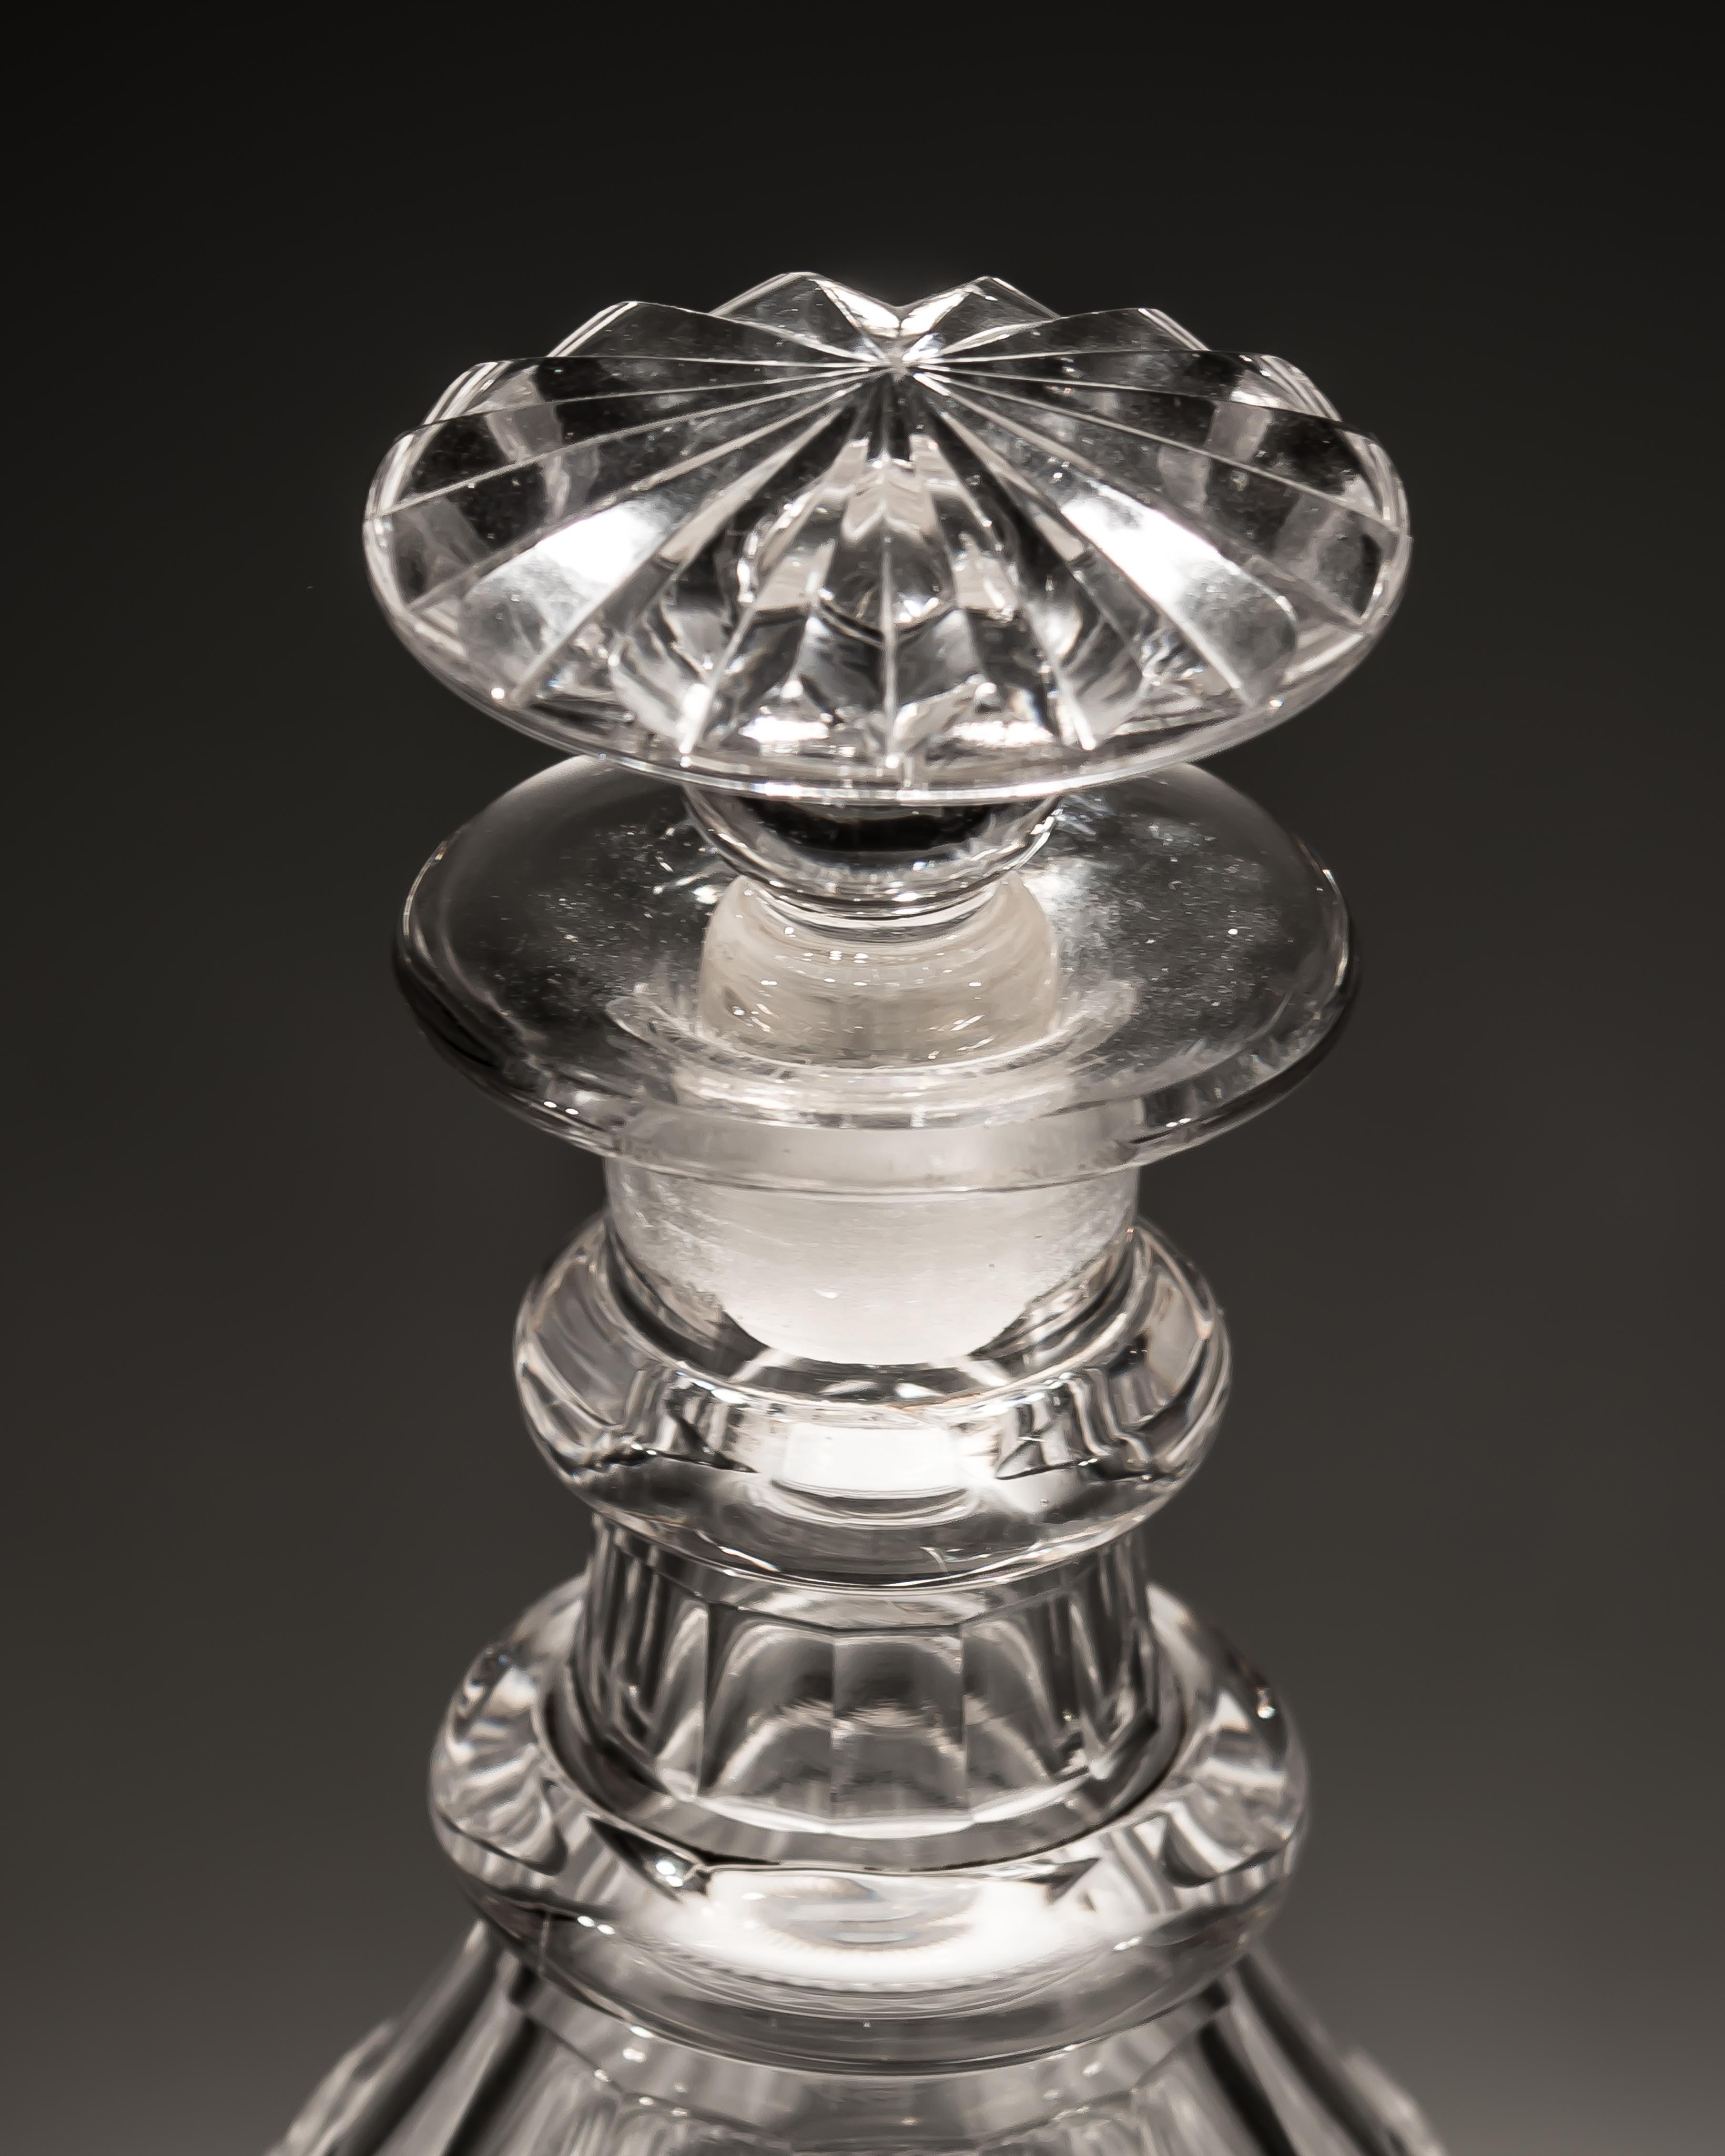 A pair of slice cut Regency decanters with diamond cut band.